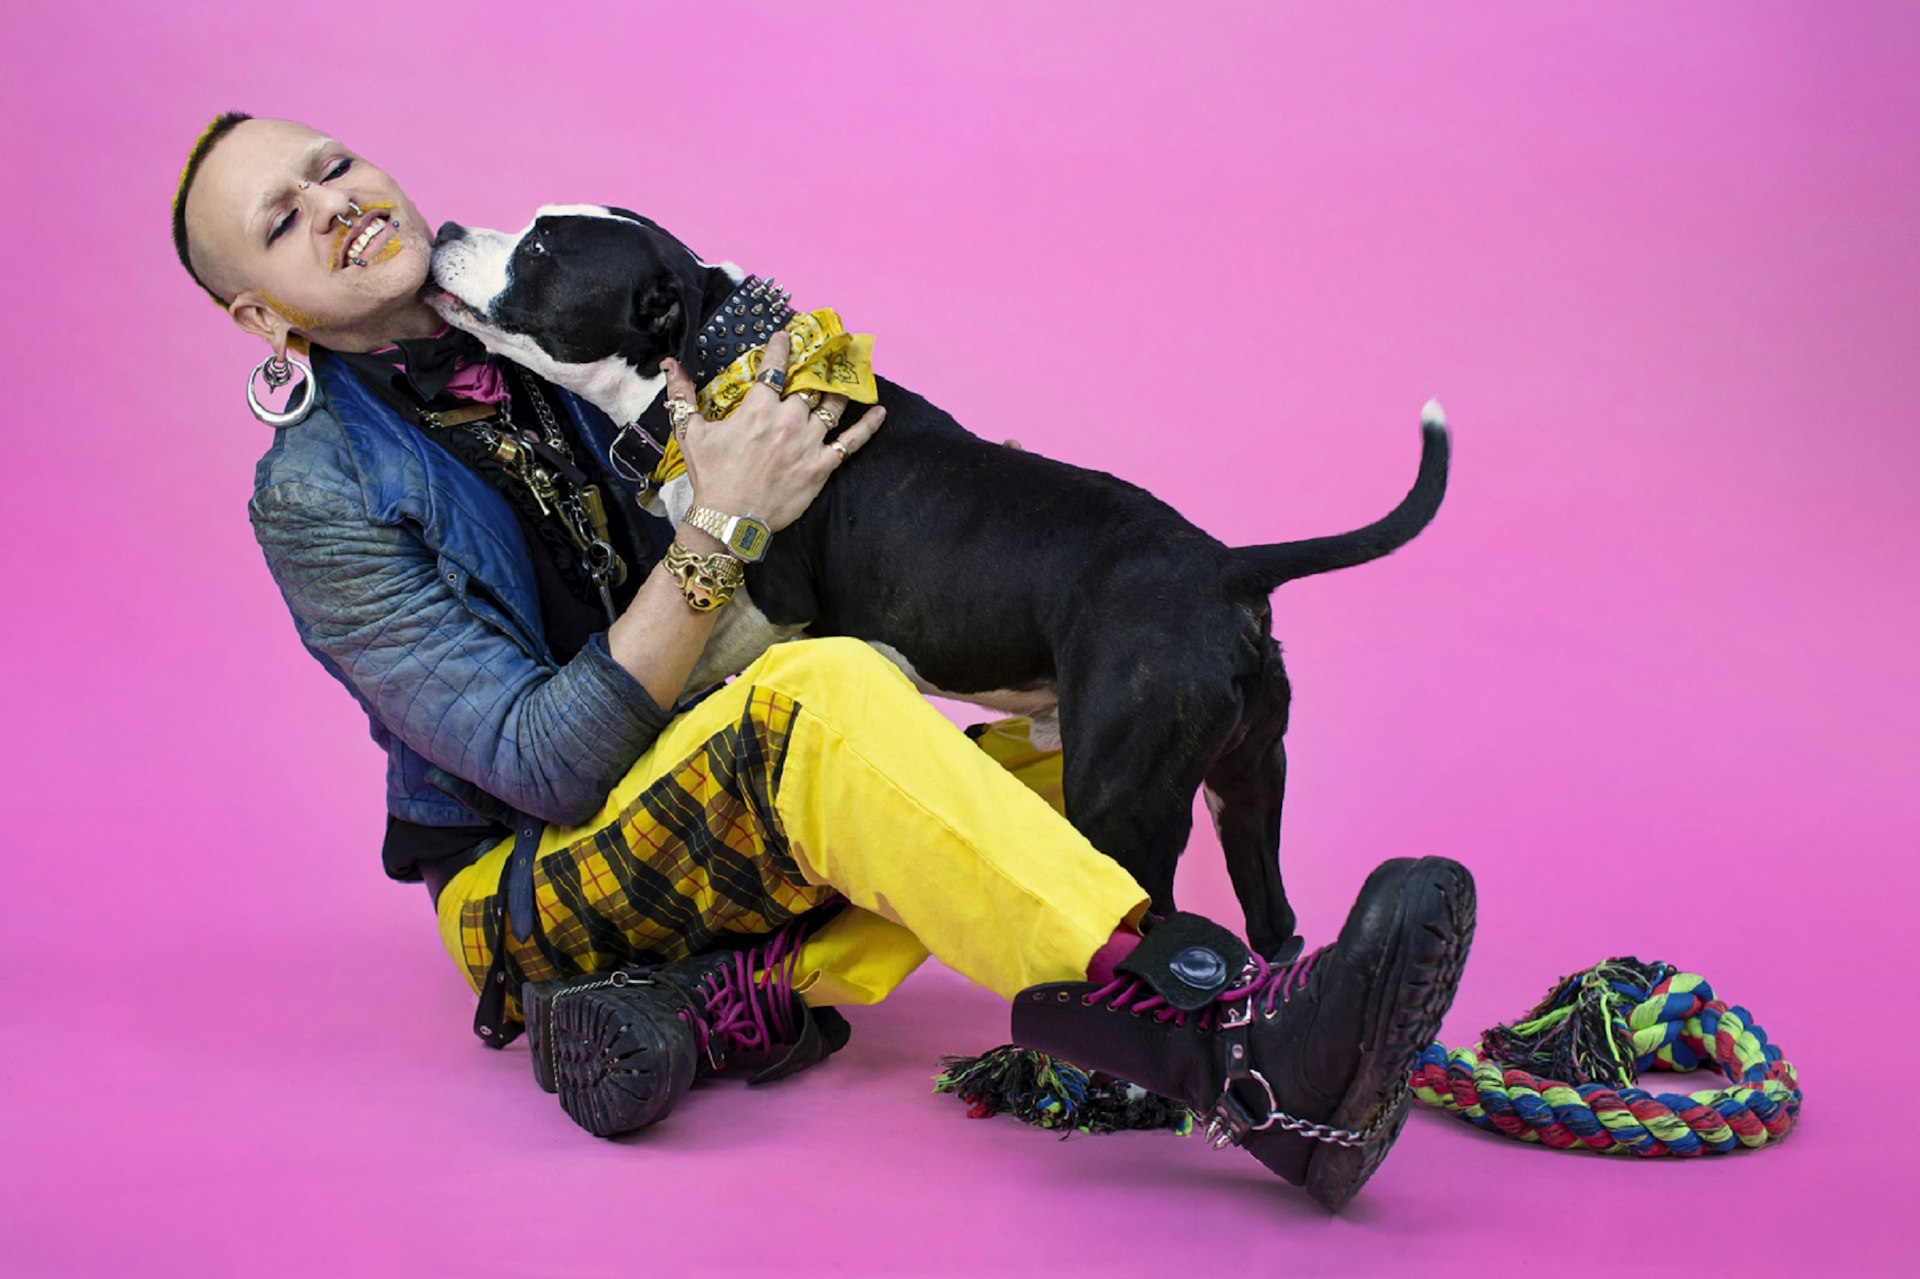 A non-binary person dressed in punk style is being licked on the face by their black-and-white dog